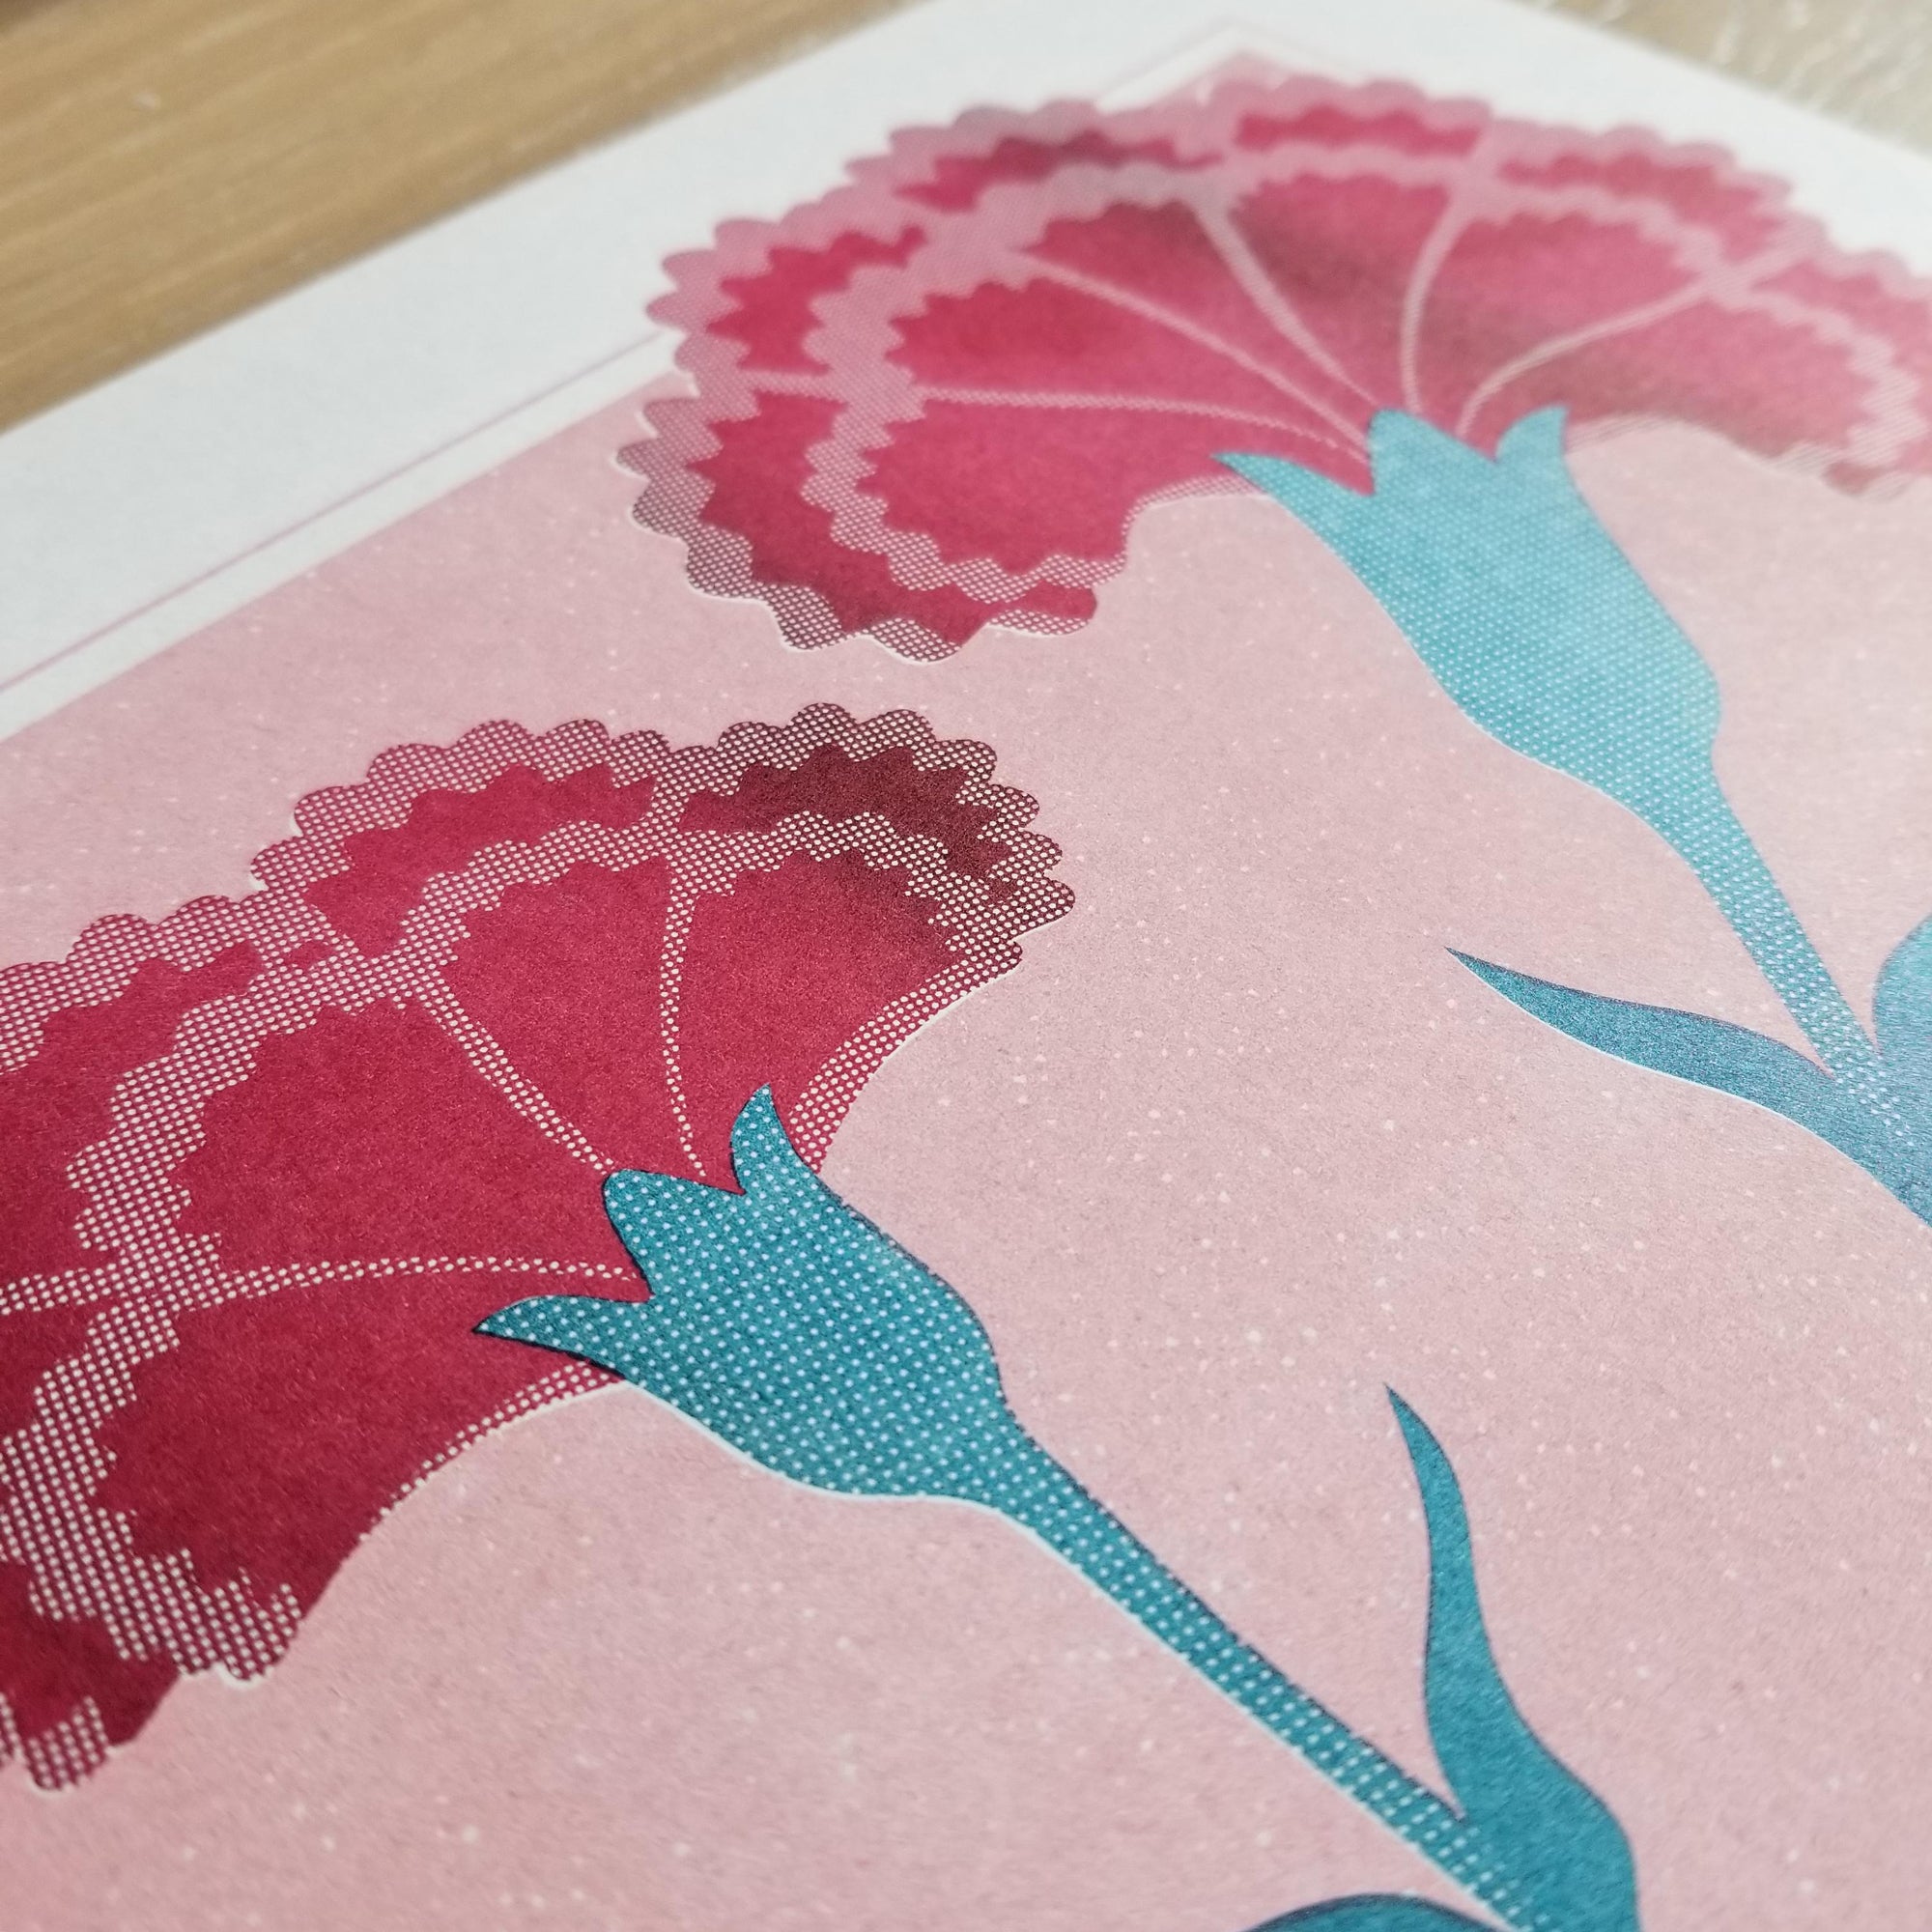 Risograph printed flowers in red, teal, and light mauve